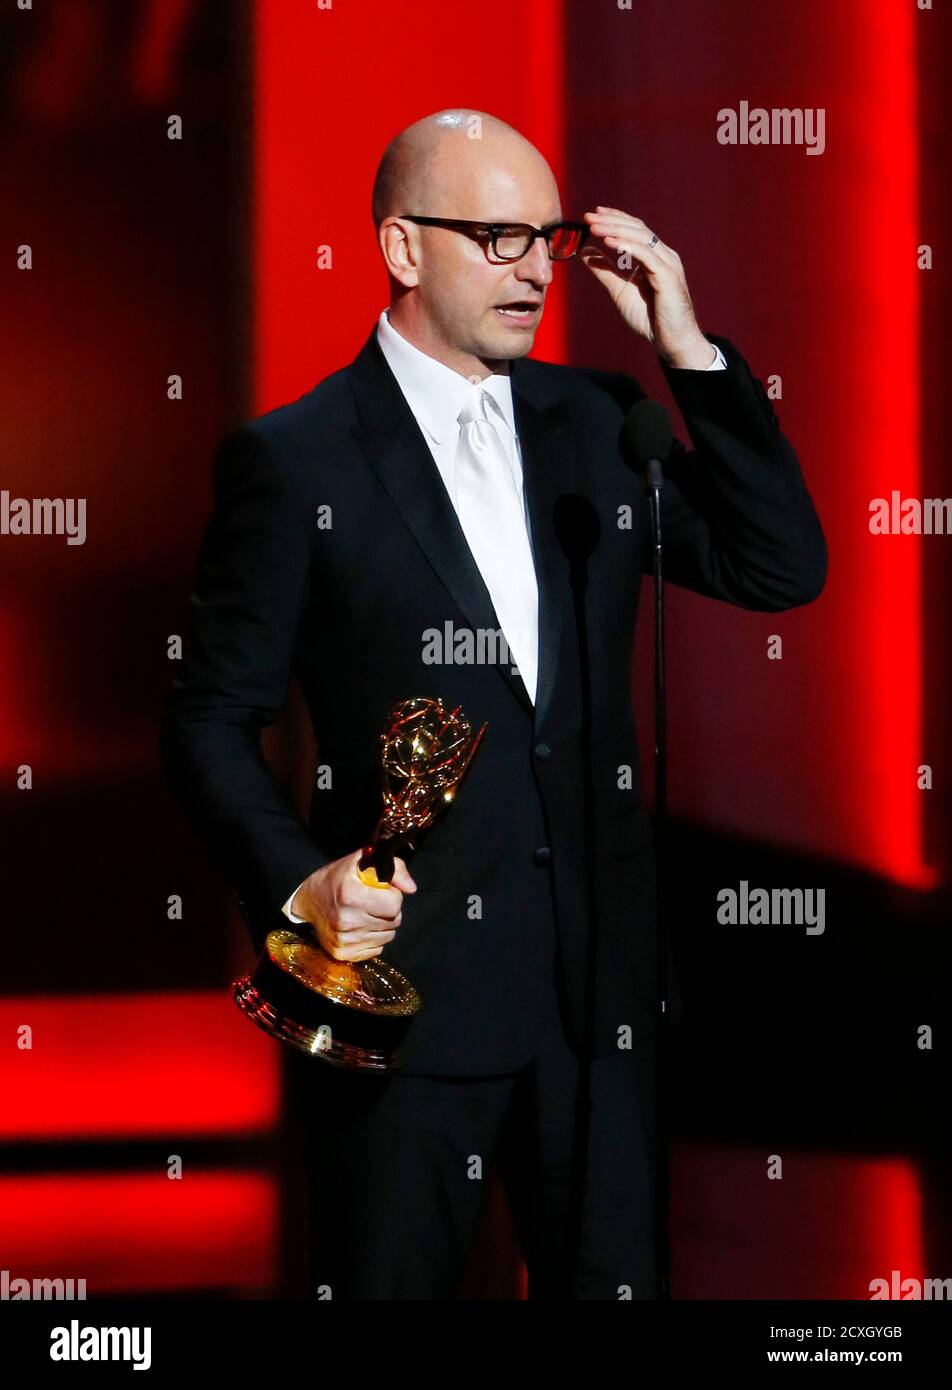 Steven Soderbergh accepts the award for Outstanding Directing, Miniseries or TV Movie for 'Behind The Candelabra' at the 65th Primetime Emmy Awards in Los Angeles September 22, 2013.  REUTERS/Mike Blake (UNITED STATES  Tags: ENTERTAINMENT)(EMMYS-SHOW) Stock Photo